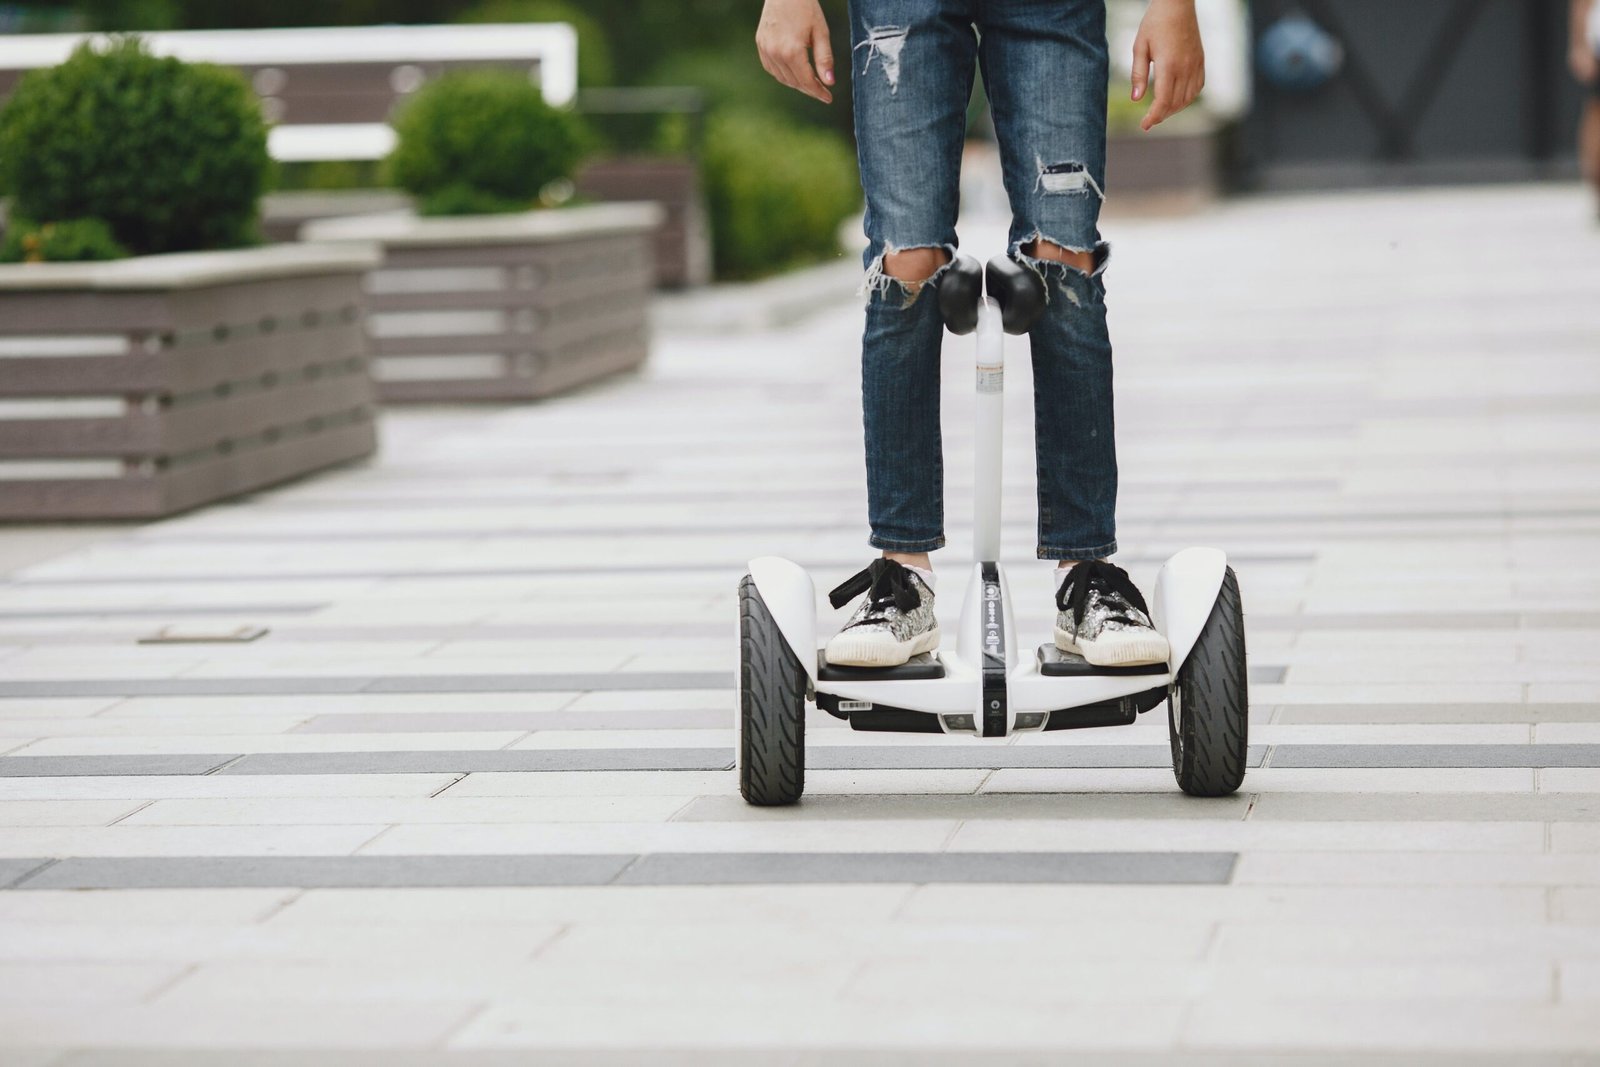 Can I Use A Hoverboard For Rideshare Services Like Uber Or Lyft?